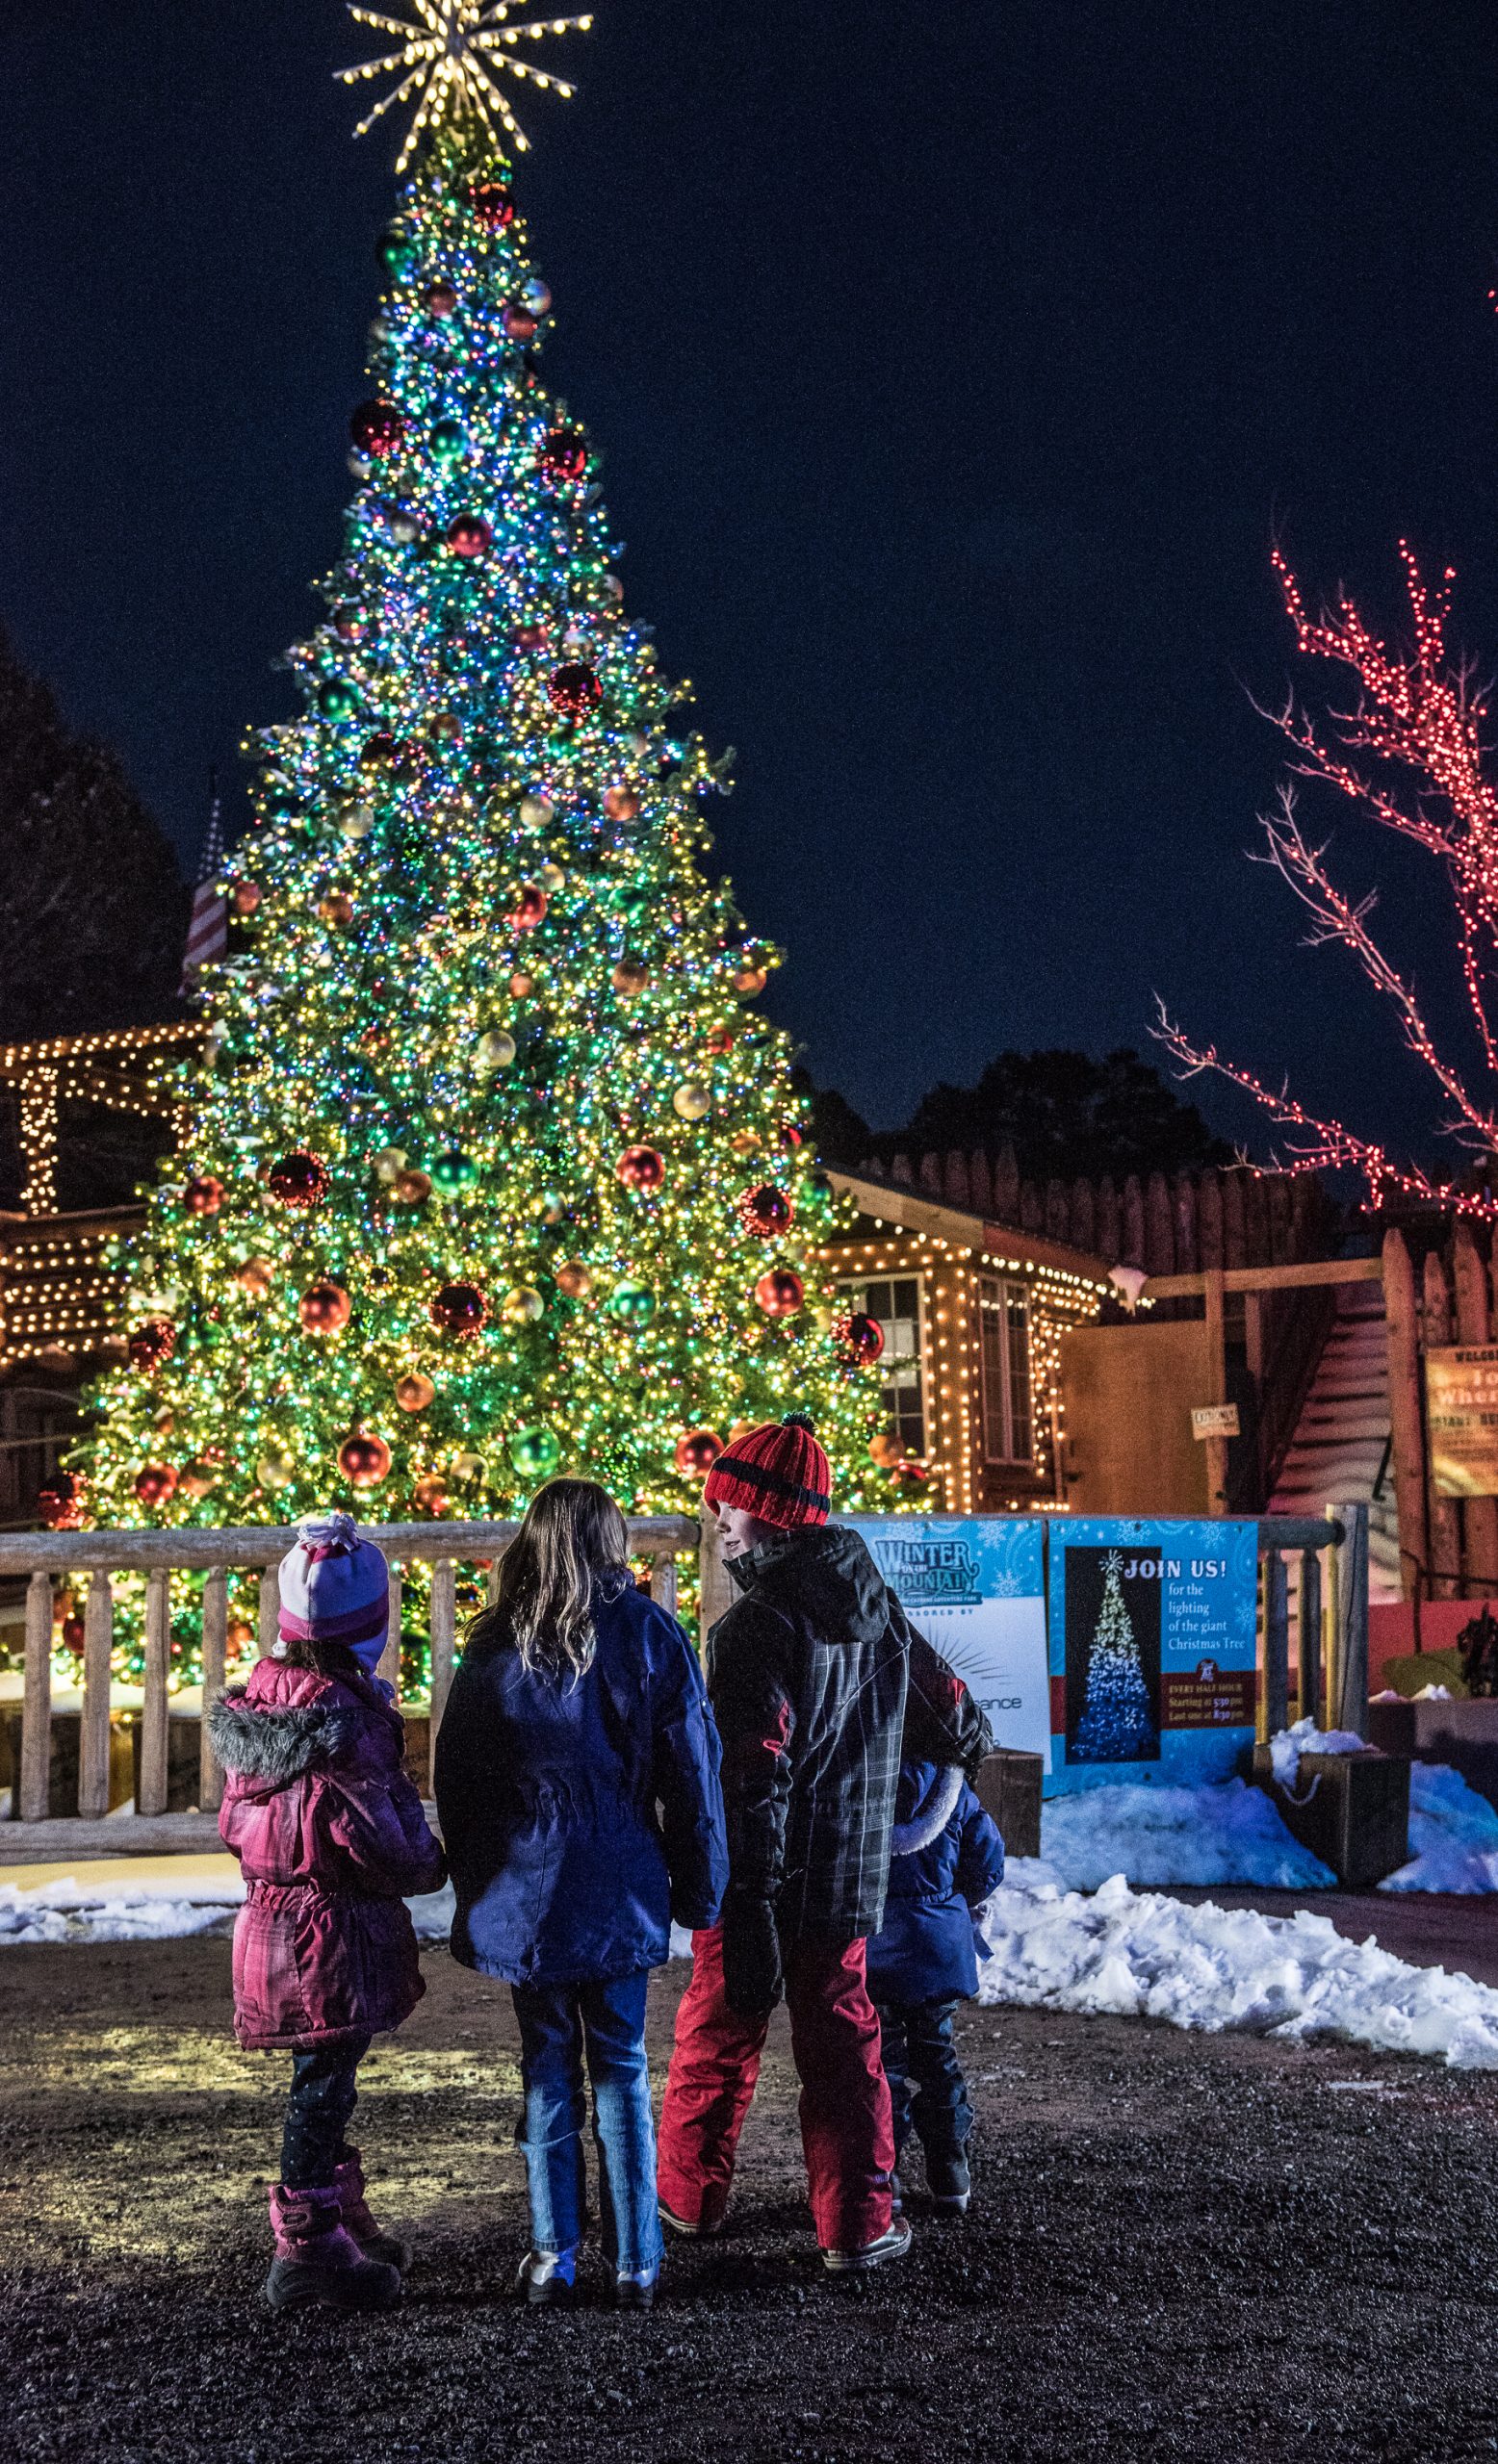 Glenwood Springs holiday traditions include Winter on the Mountain at Glenwood Caverns Adventure Park